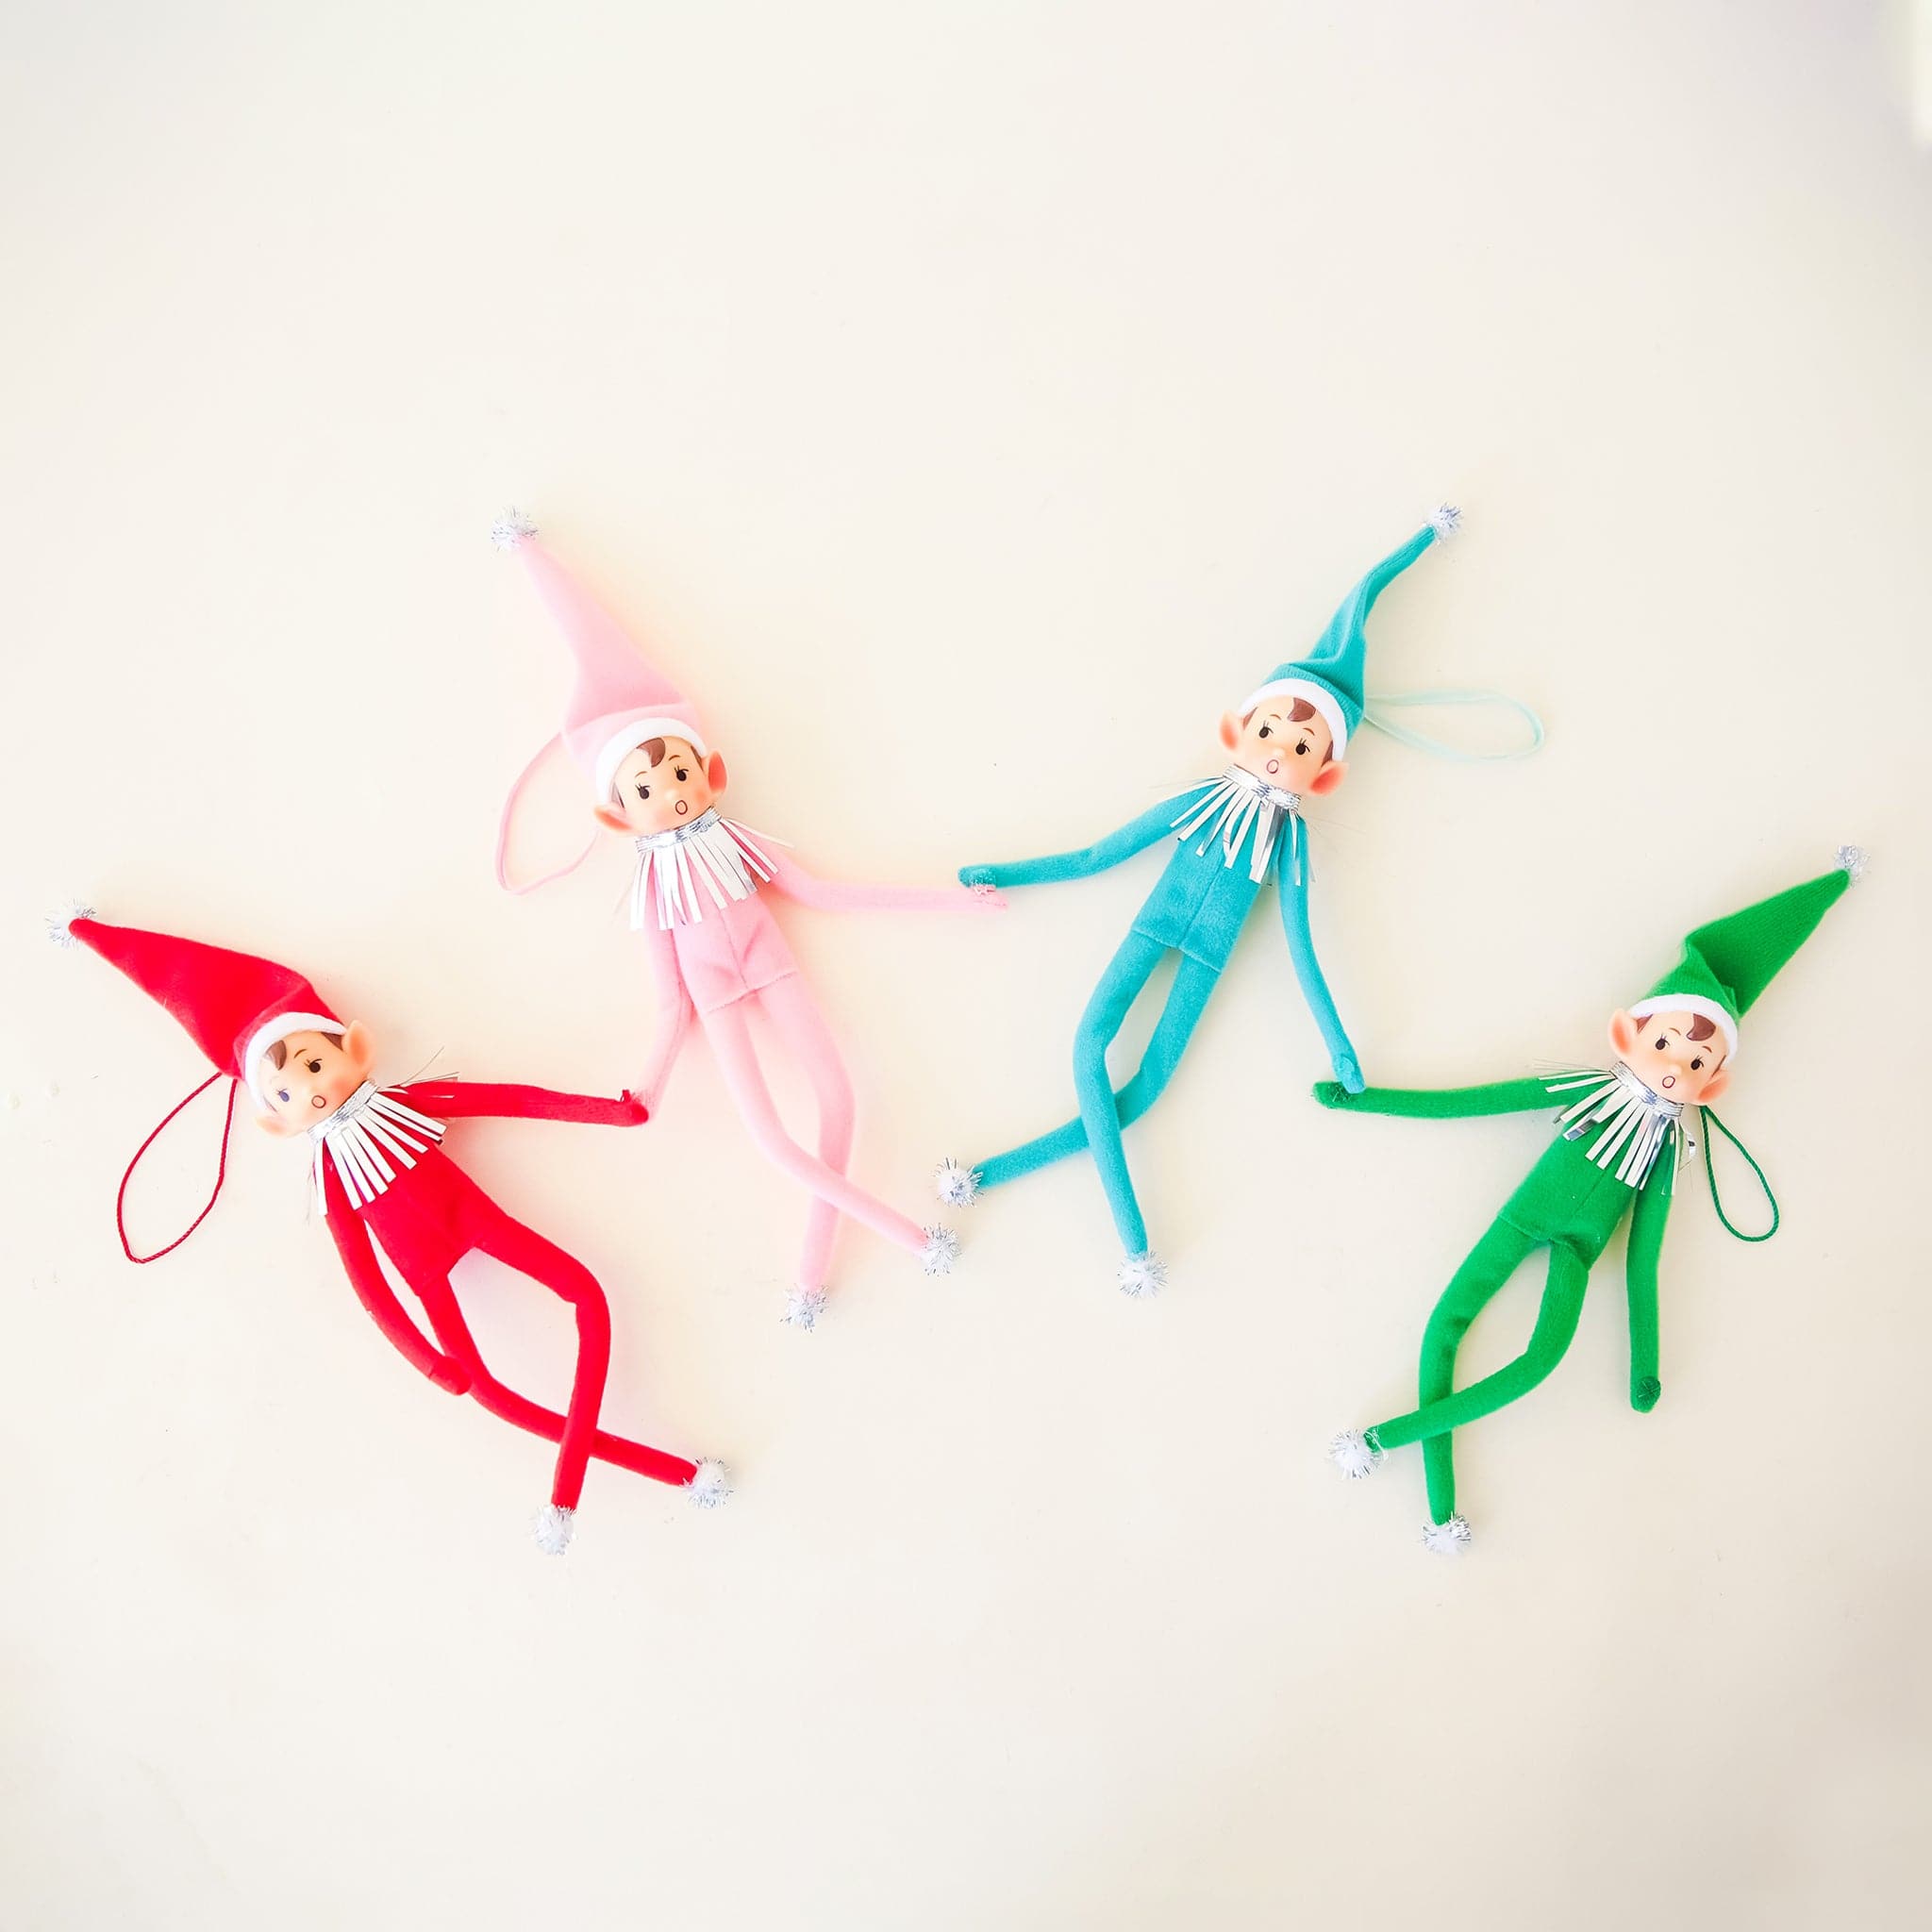 On a cream background is a red elf ornament with bendy arms and legs and a green loop for hanging and photographed next to the other three available colors, green, teal and pink.